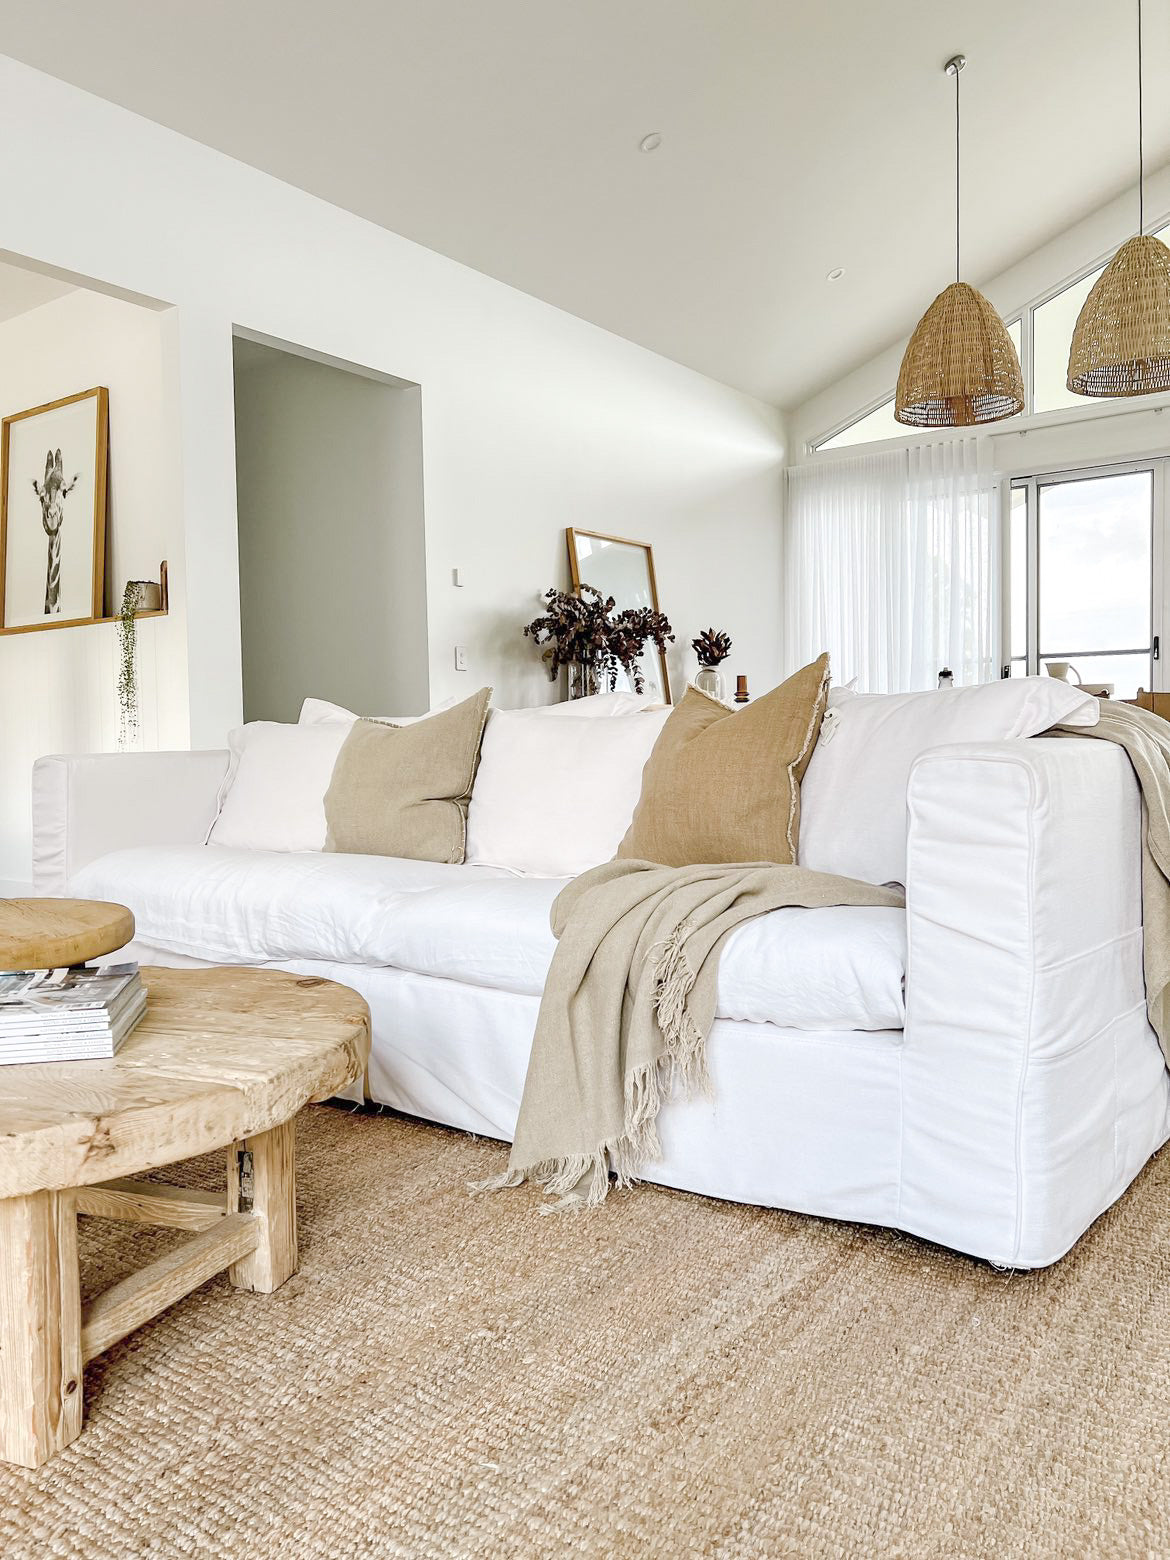 100% pure, quality, hand loomed linen. Crafted with a hopsack weave and stonewashed, The Aspire collection of linen throwrugs are available in four neutral tones with coordinating cushions in a frayed or embroidered edge. Staple, aesthetic pieces for the neutral home. Available in Ivory, Crisp White, Natural Flax and Tobacco 